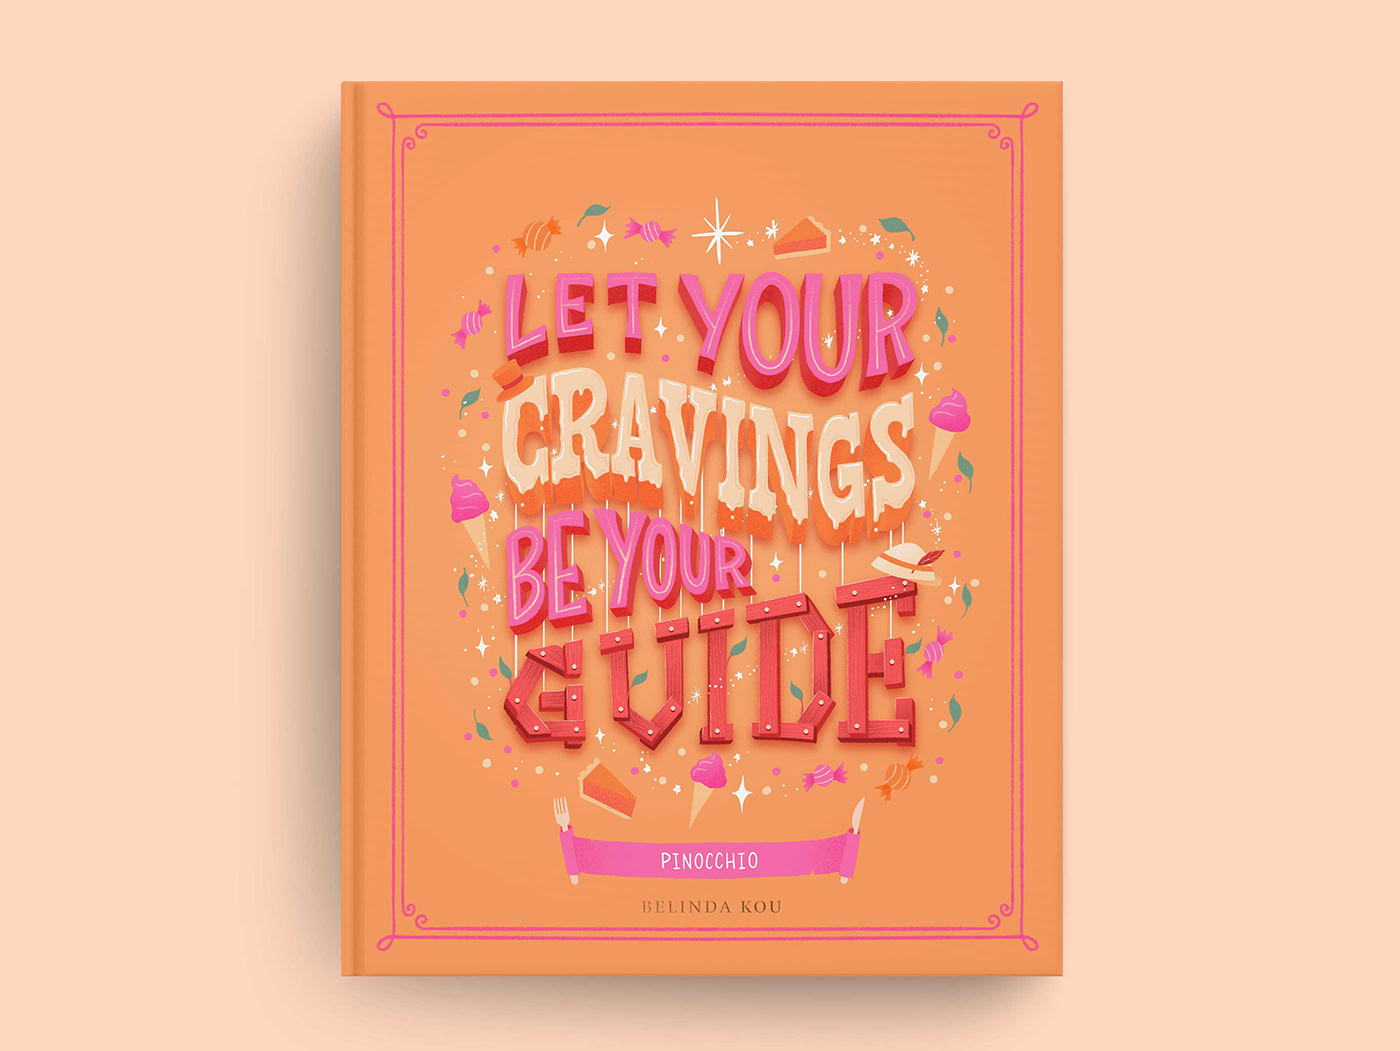 Pinocchio book cover art featuring hand lettering and illustrations of fairy tale and food art